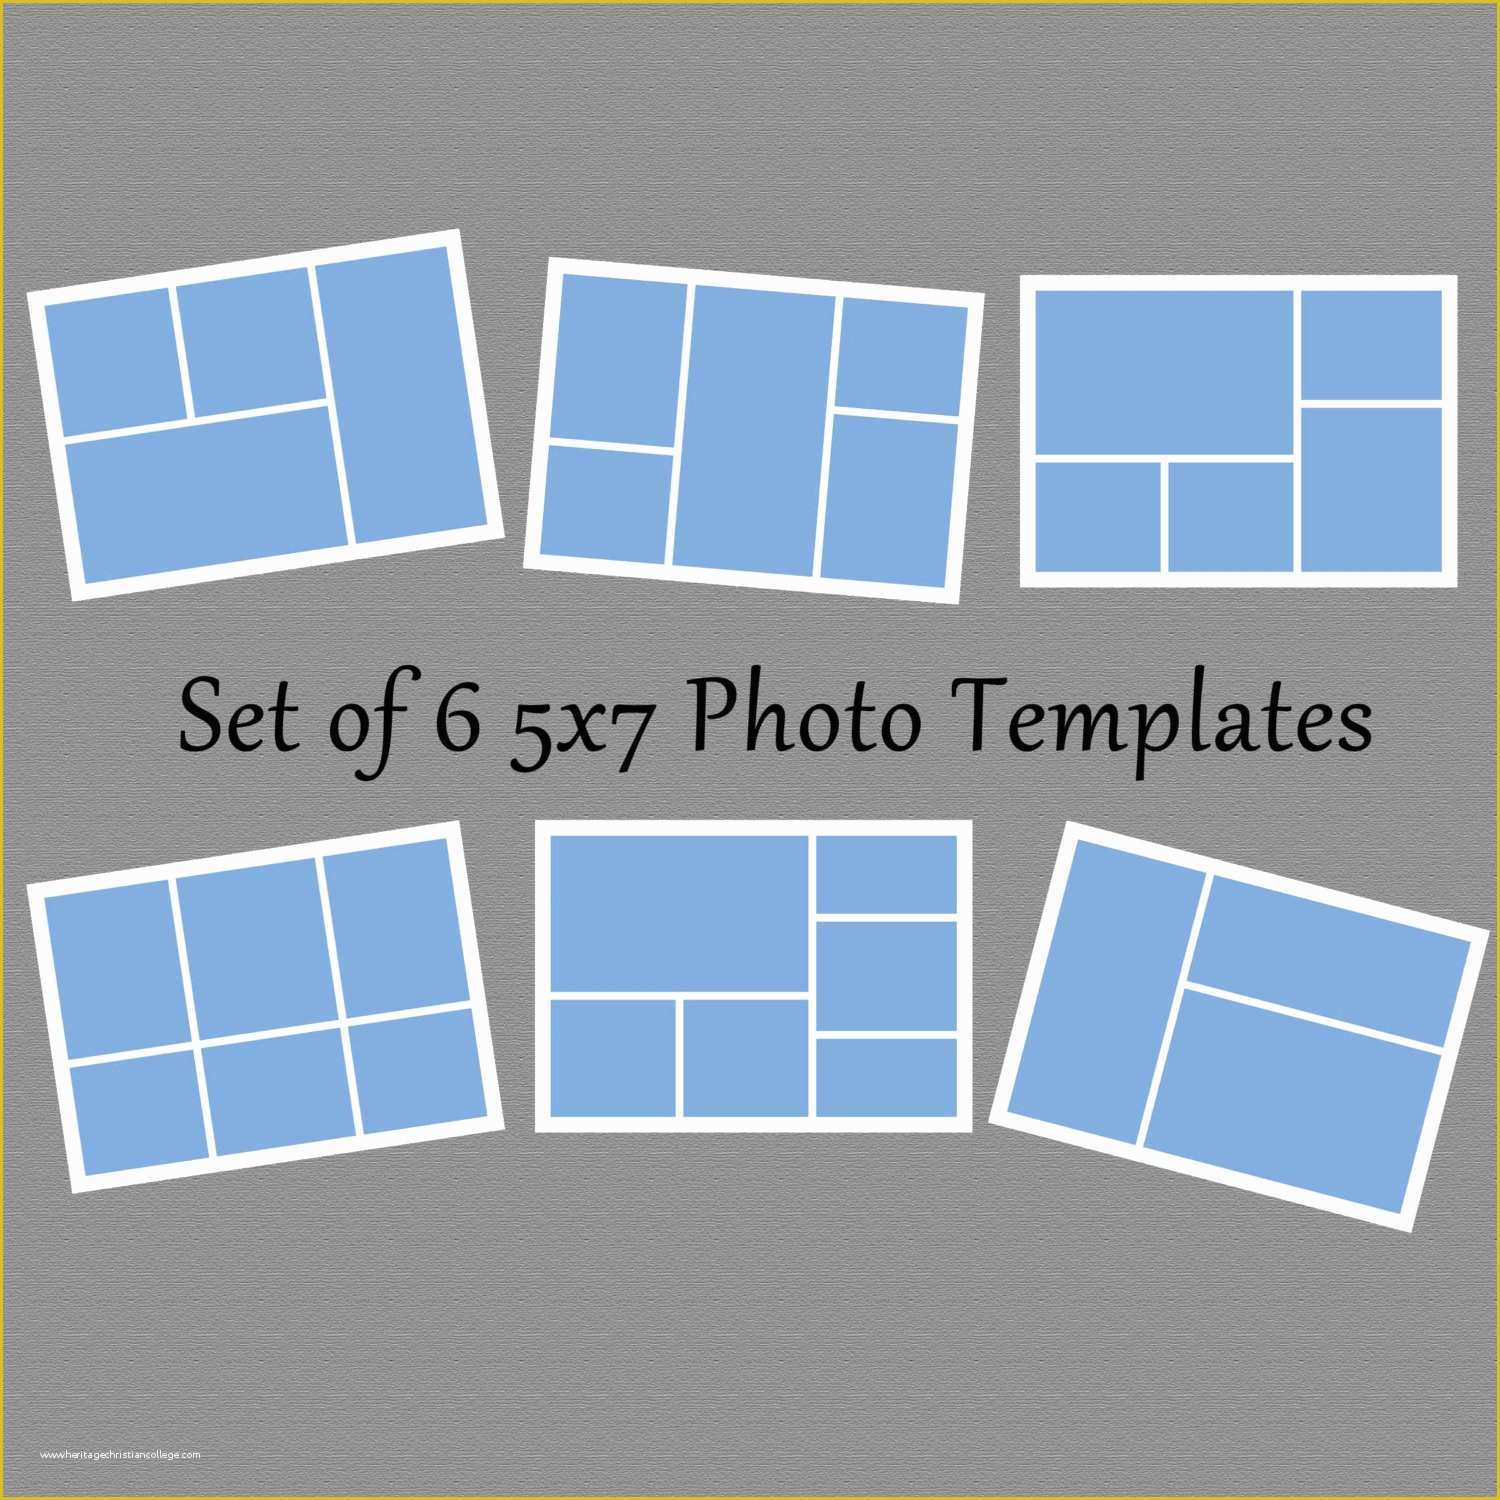 Free Photoshop Templates for Photographers Of 15 Simple Collage Template Psd Collage Templates